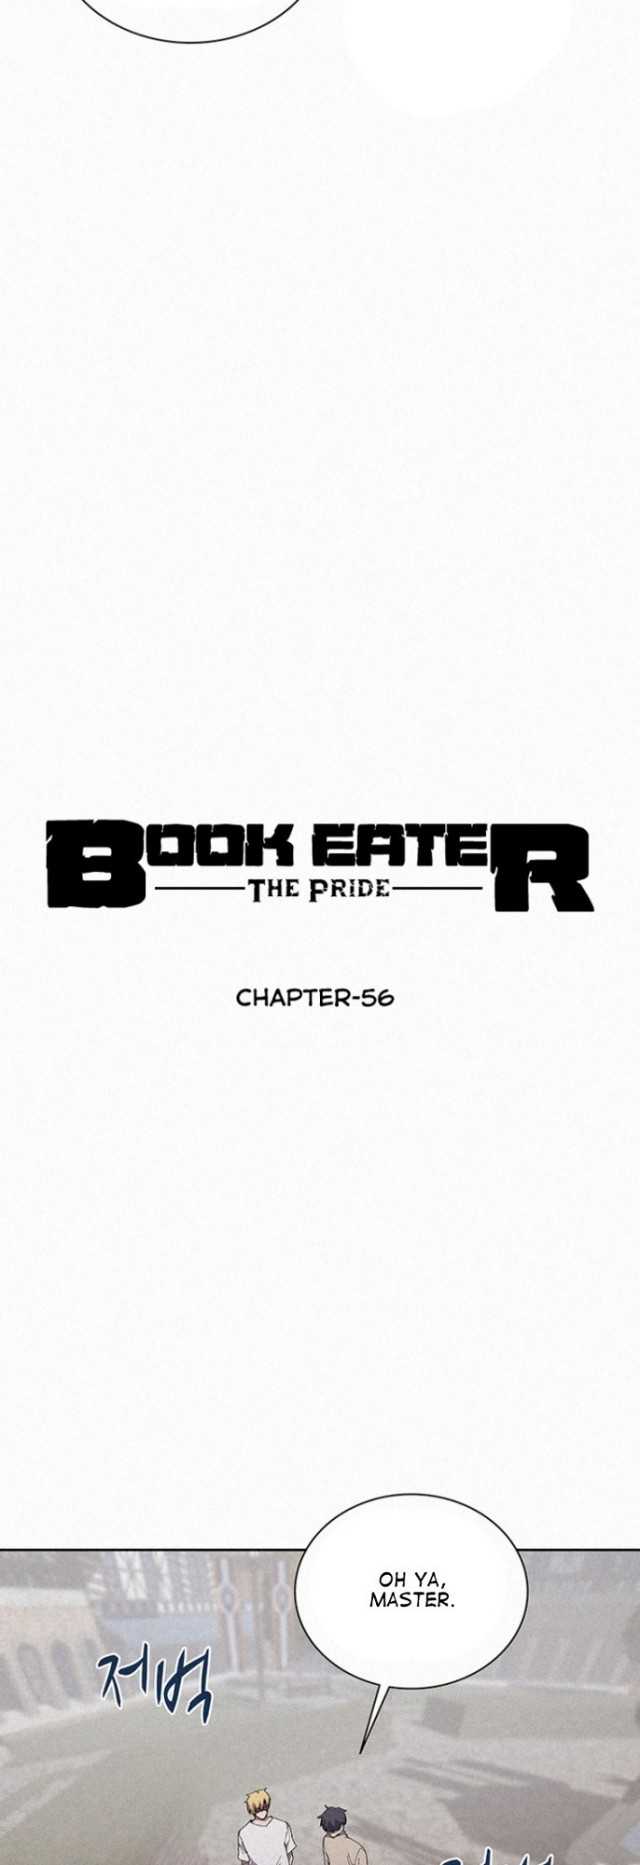 The Book Eating Magician (Book Eater) Chapter 56